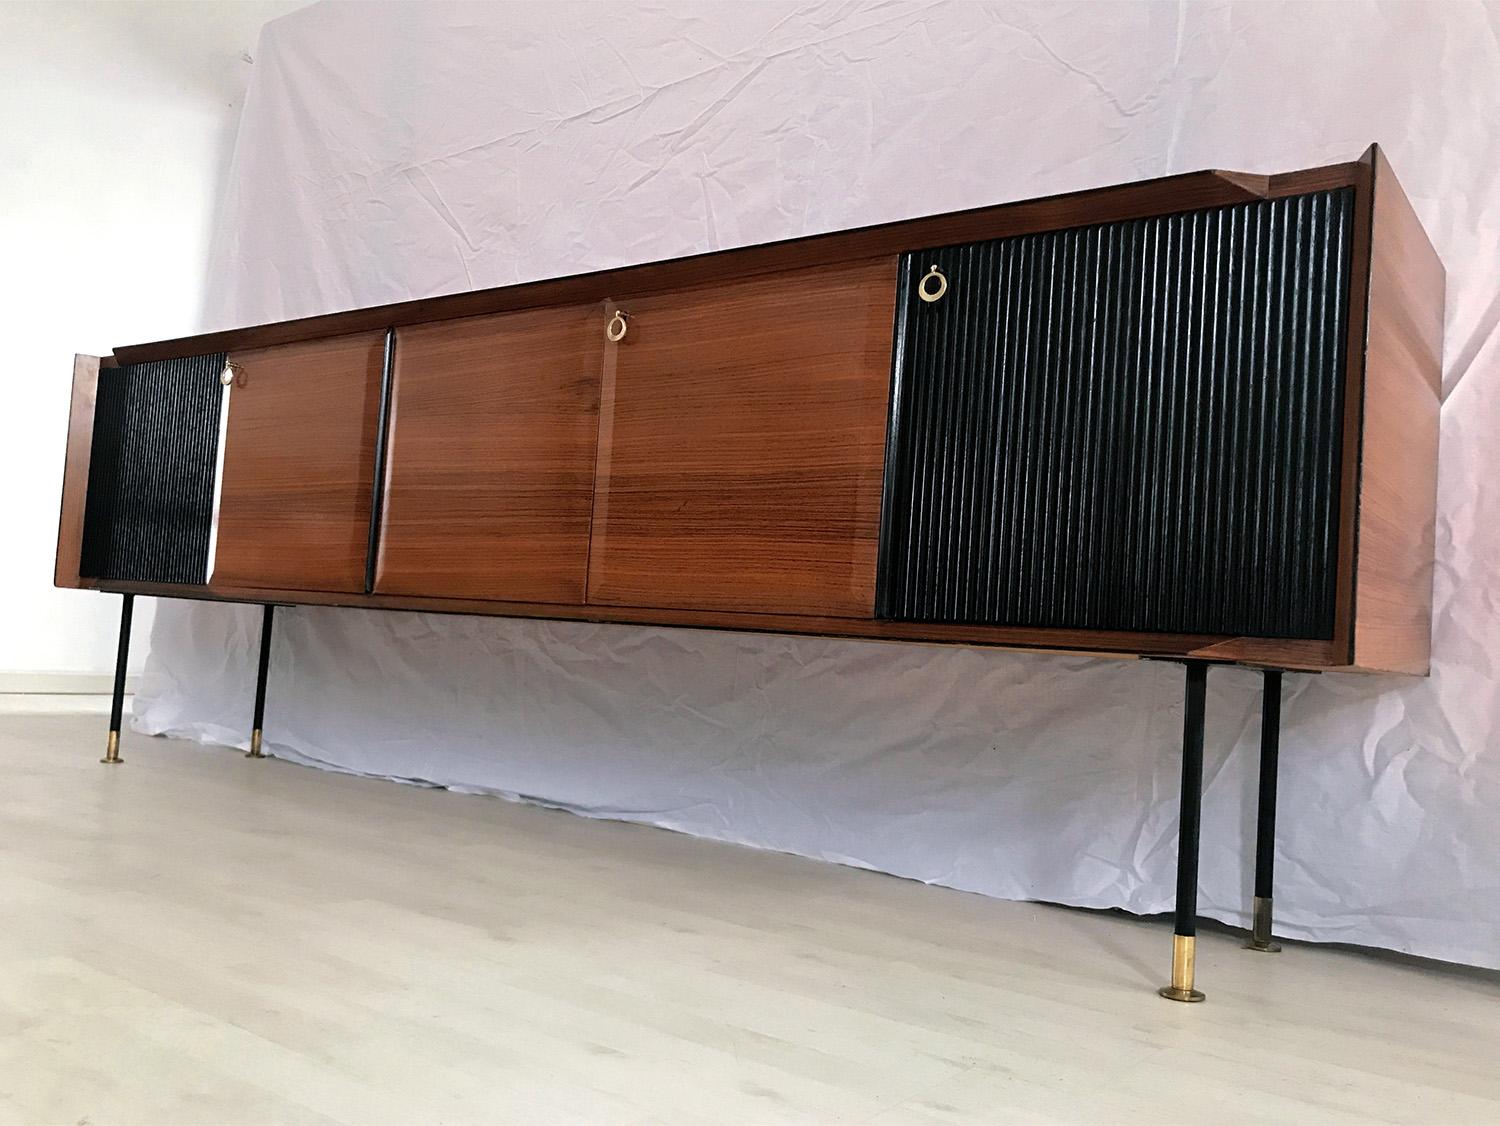 Fantastic Italian sideboard designed by Vittorio Dassi in the 1950s.
The structure is a unique piece composed by a long floating cabinet supported by metal legs finished with brass feet, and many cabinets with doors, partly in teak wood and, on the